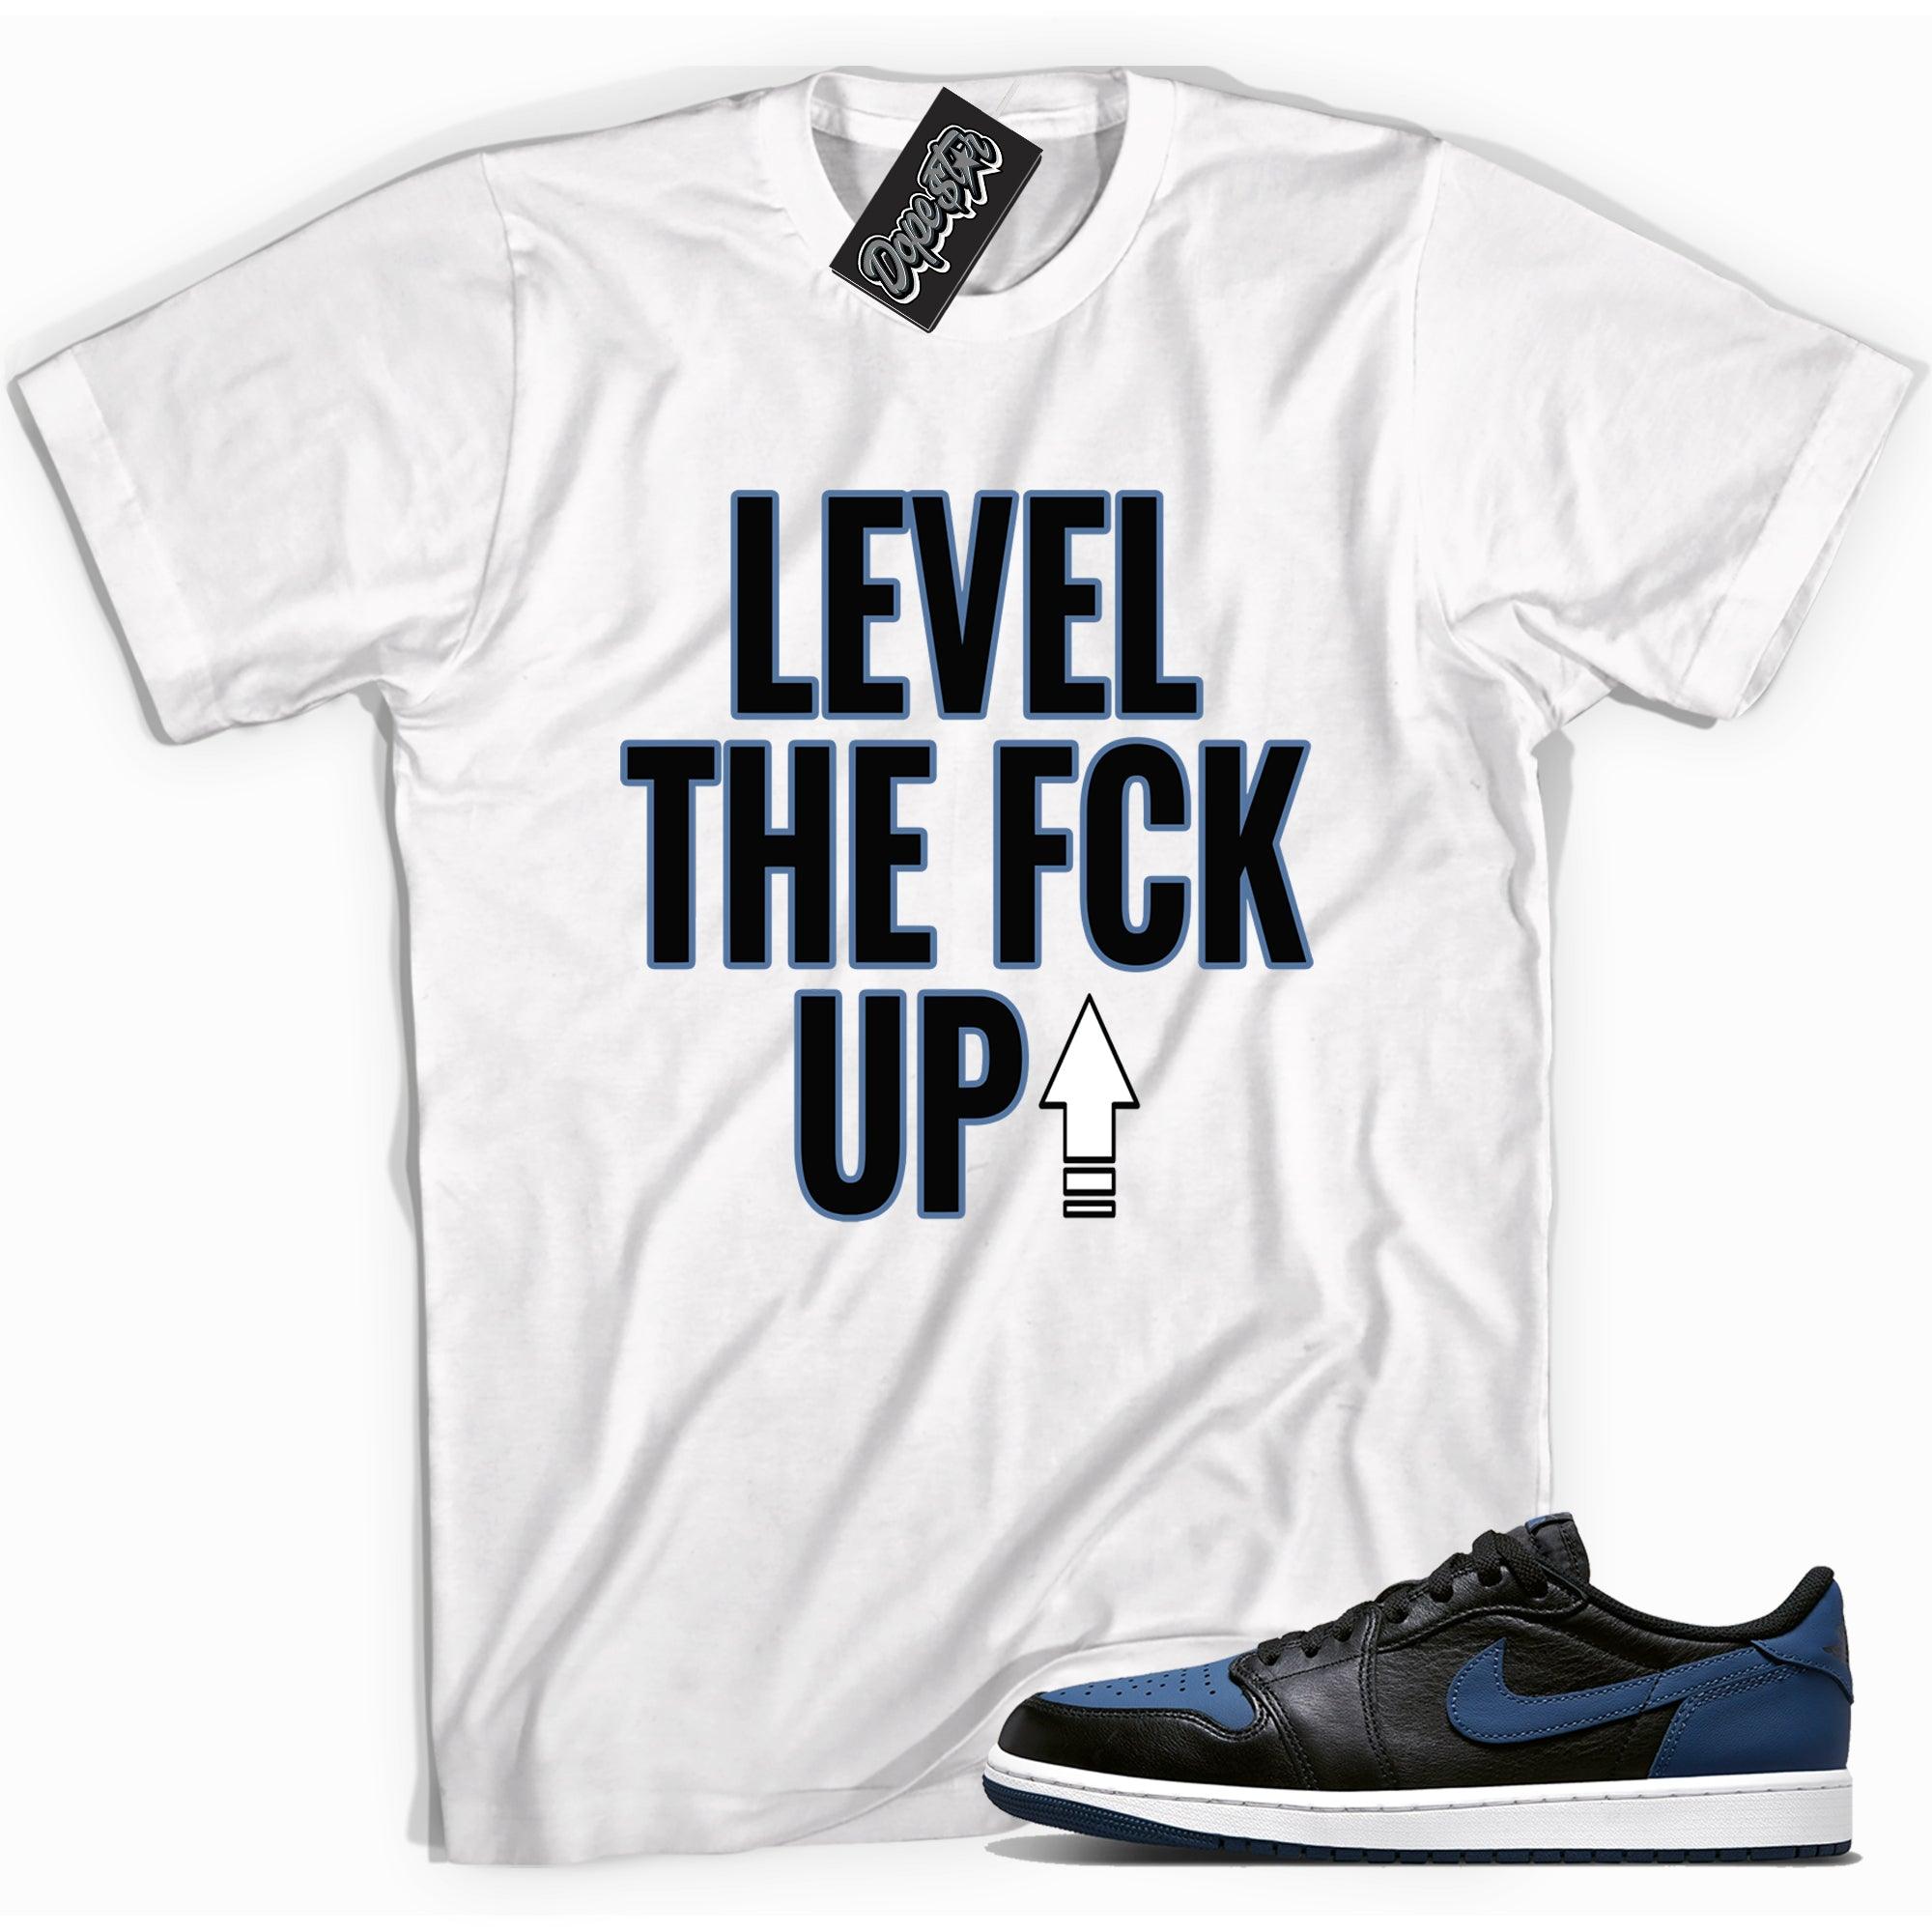 Cool white graphic tee with 'Level Up' print, that perfectly matches Air Jordan 1 Retro Low OG Mystic Navy sneakers.